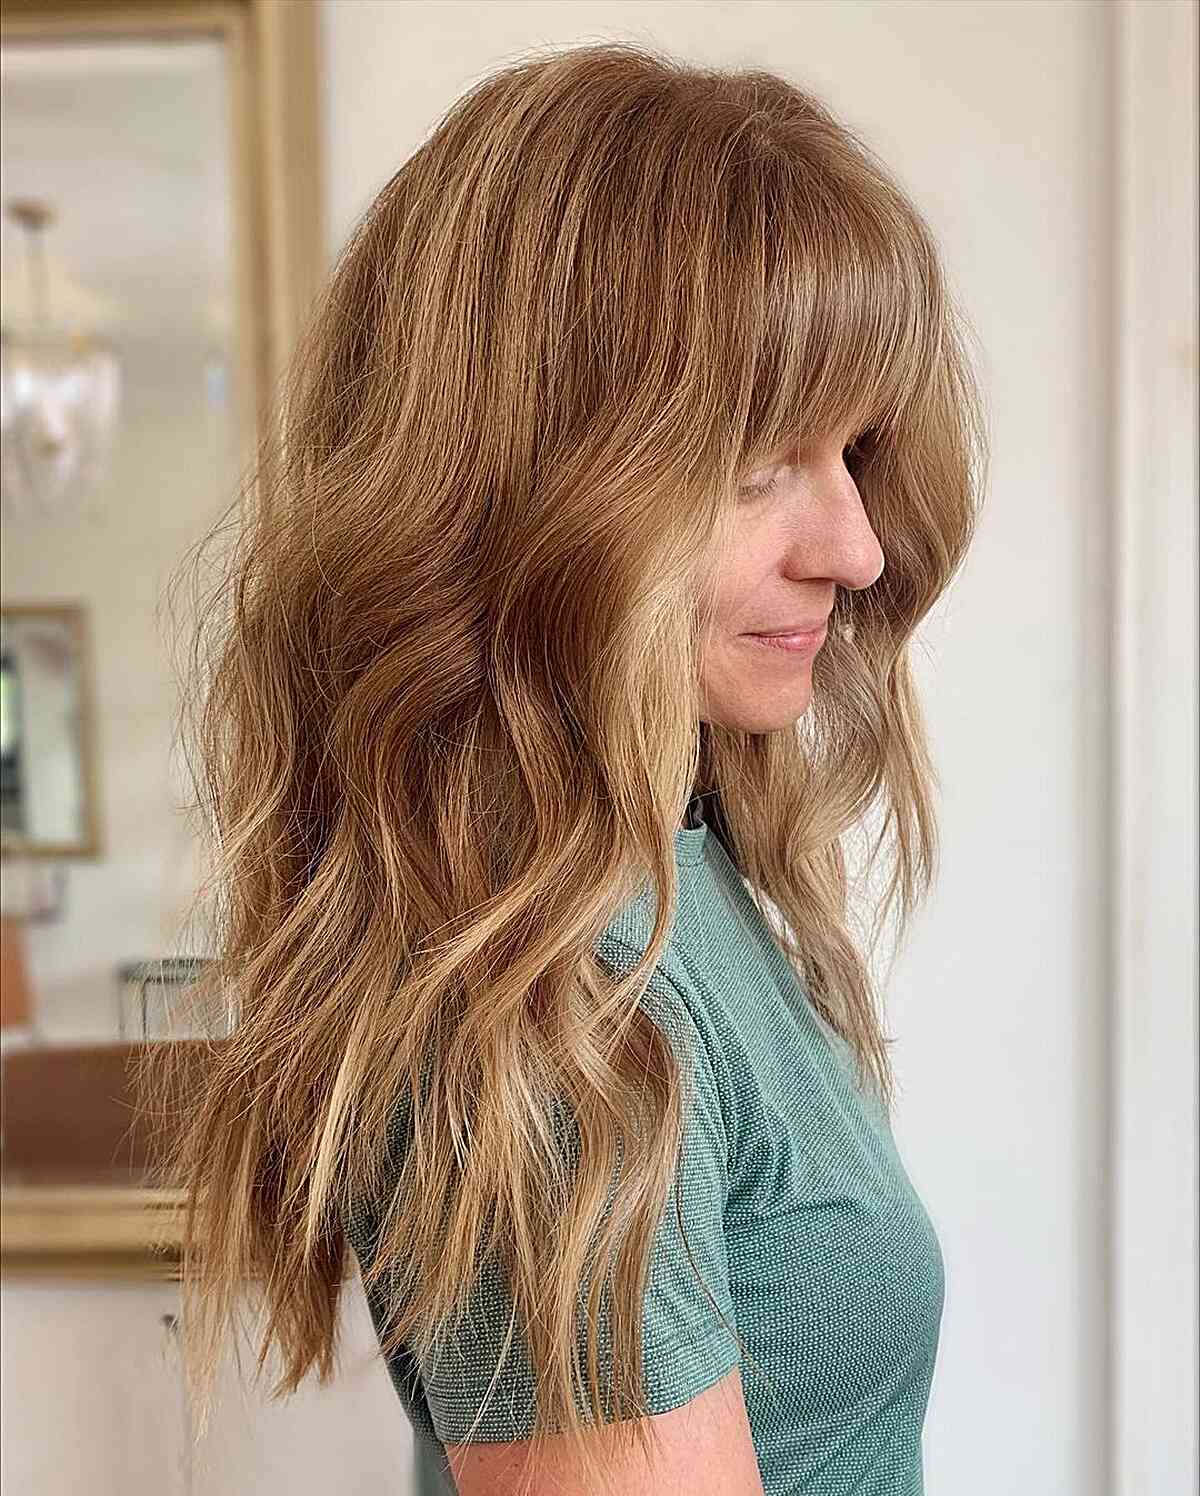 Mid-Long Textured Wavy Layers and Heavy Fringe for Mature Women over Fifty